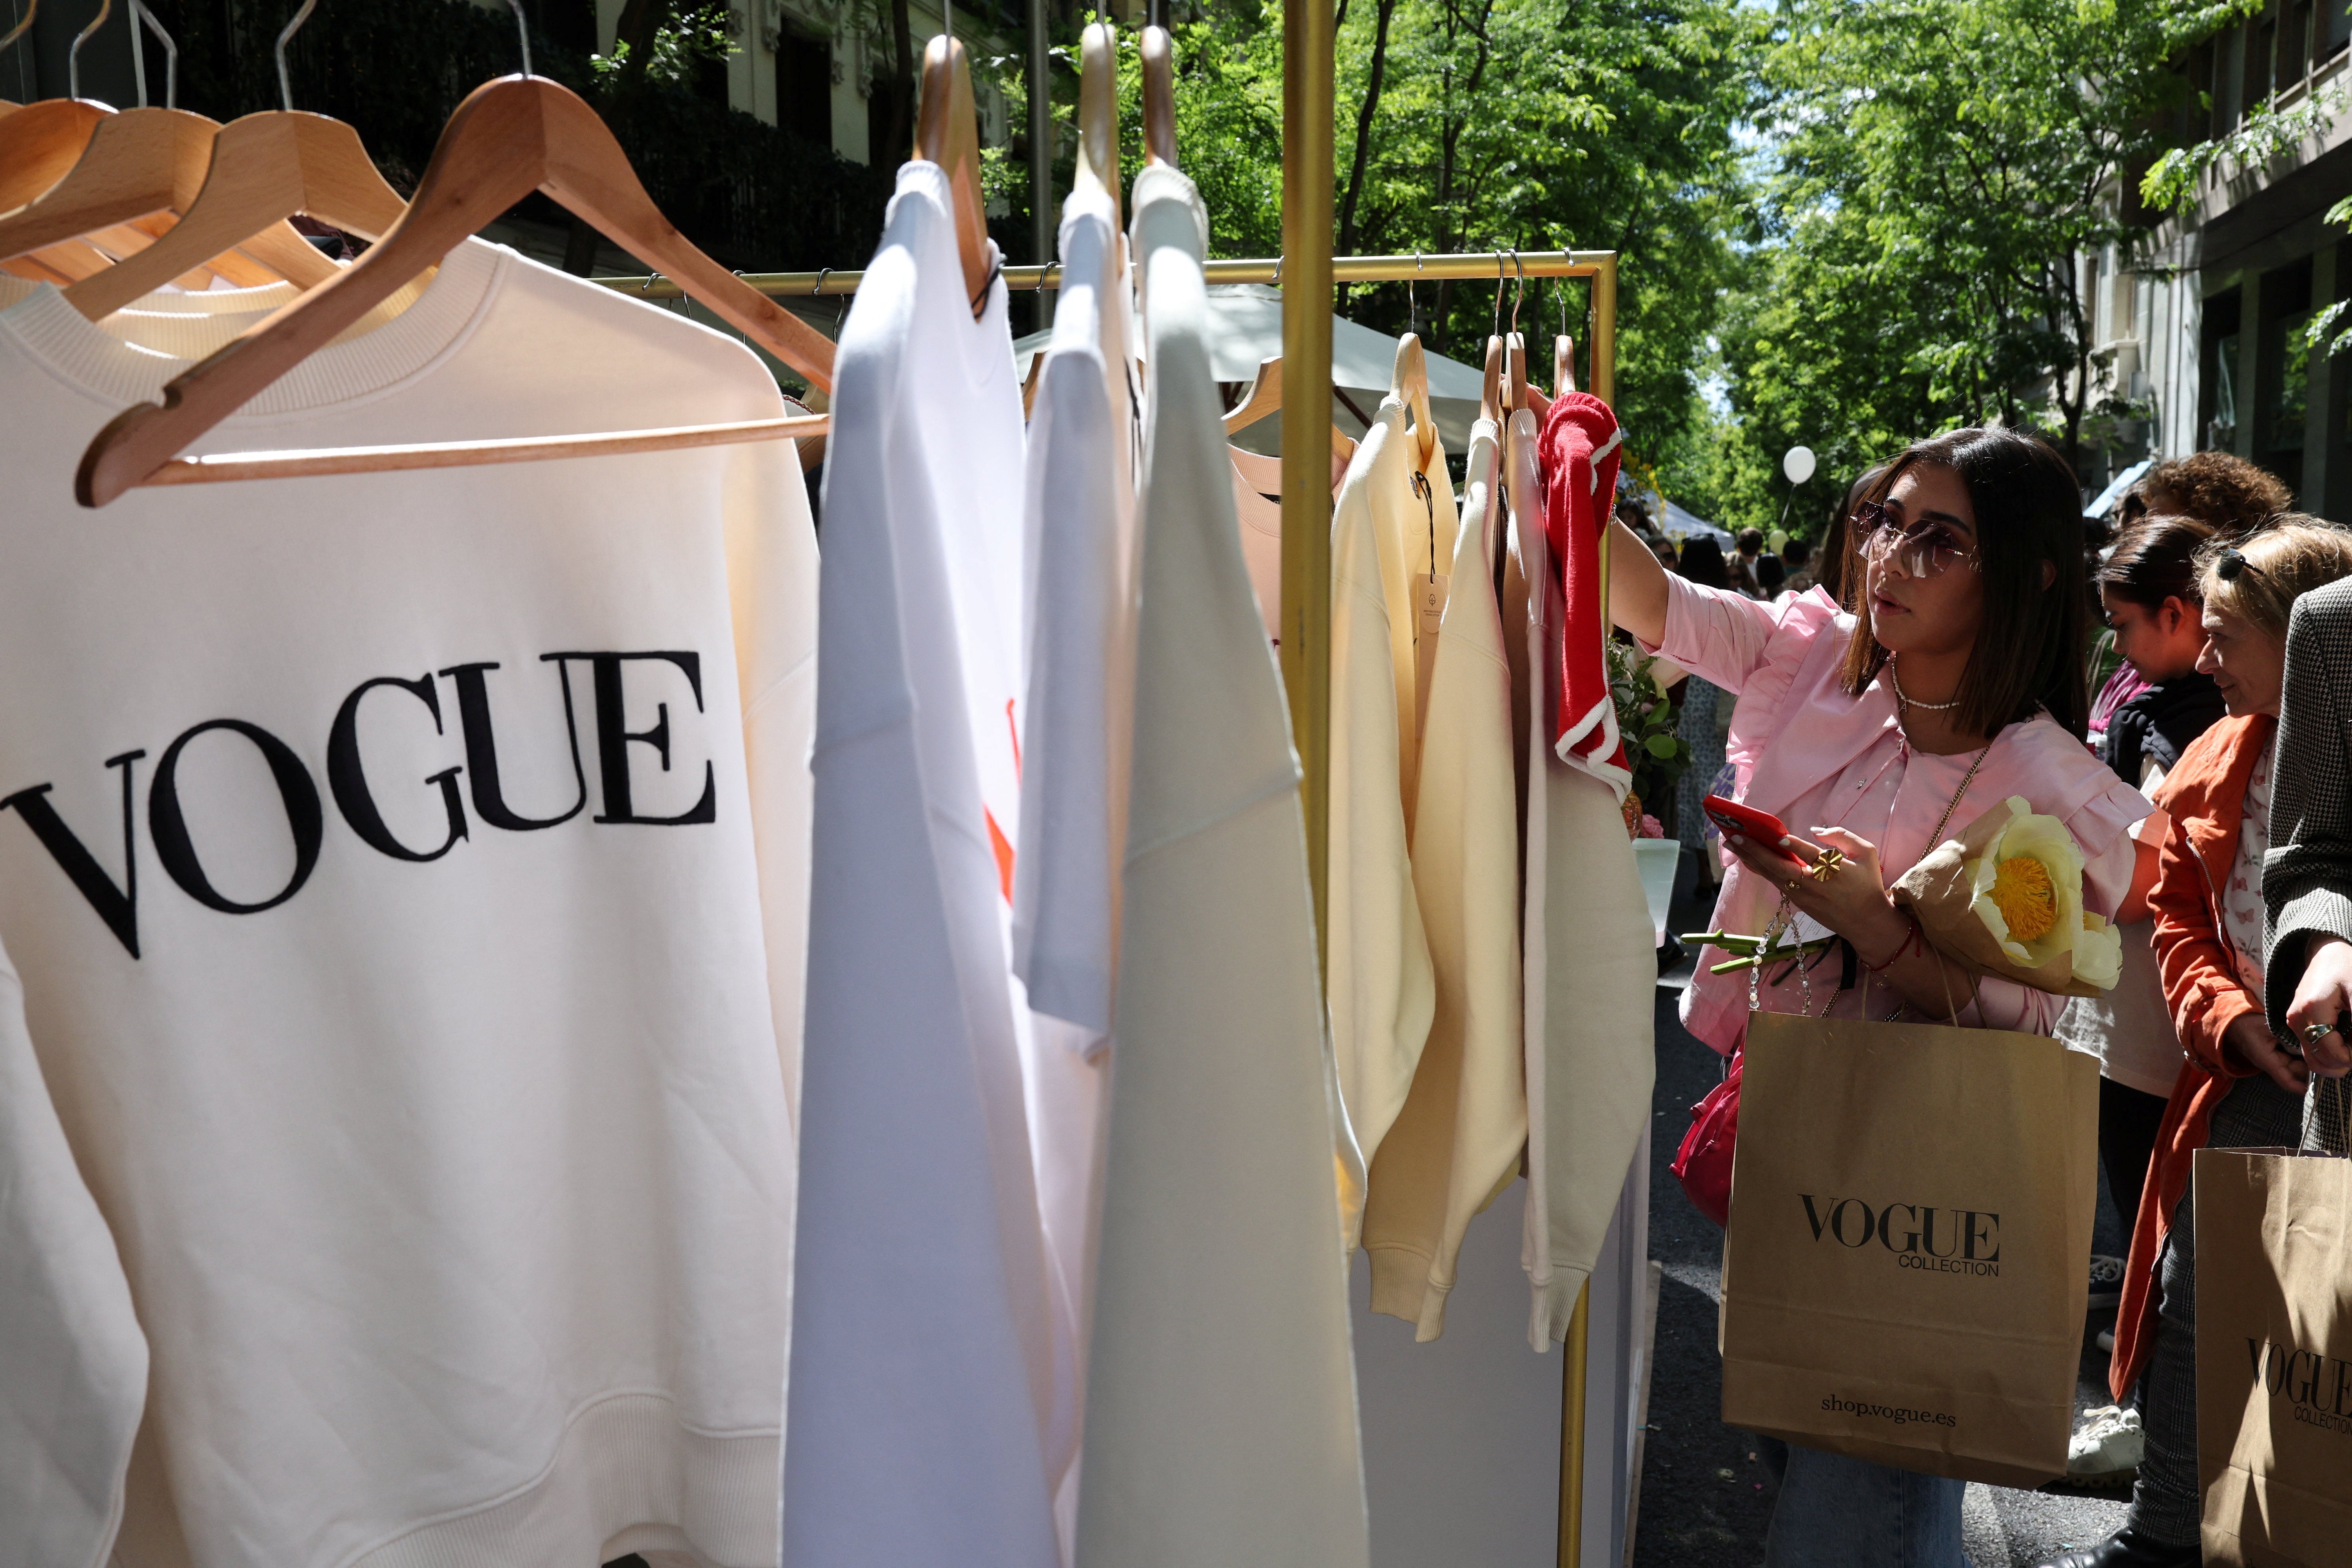 A person looks at clothes at an outdoor market in the downtown district of Salamanca, Spain